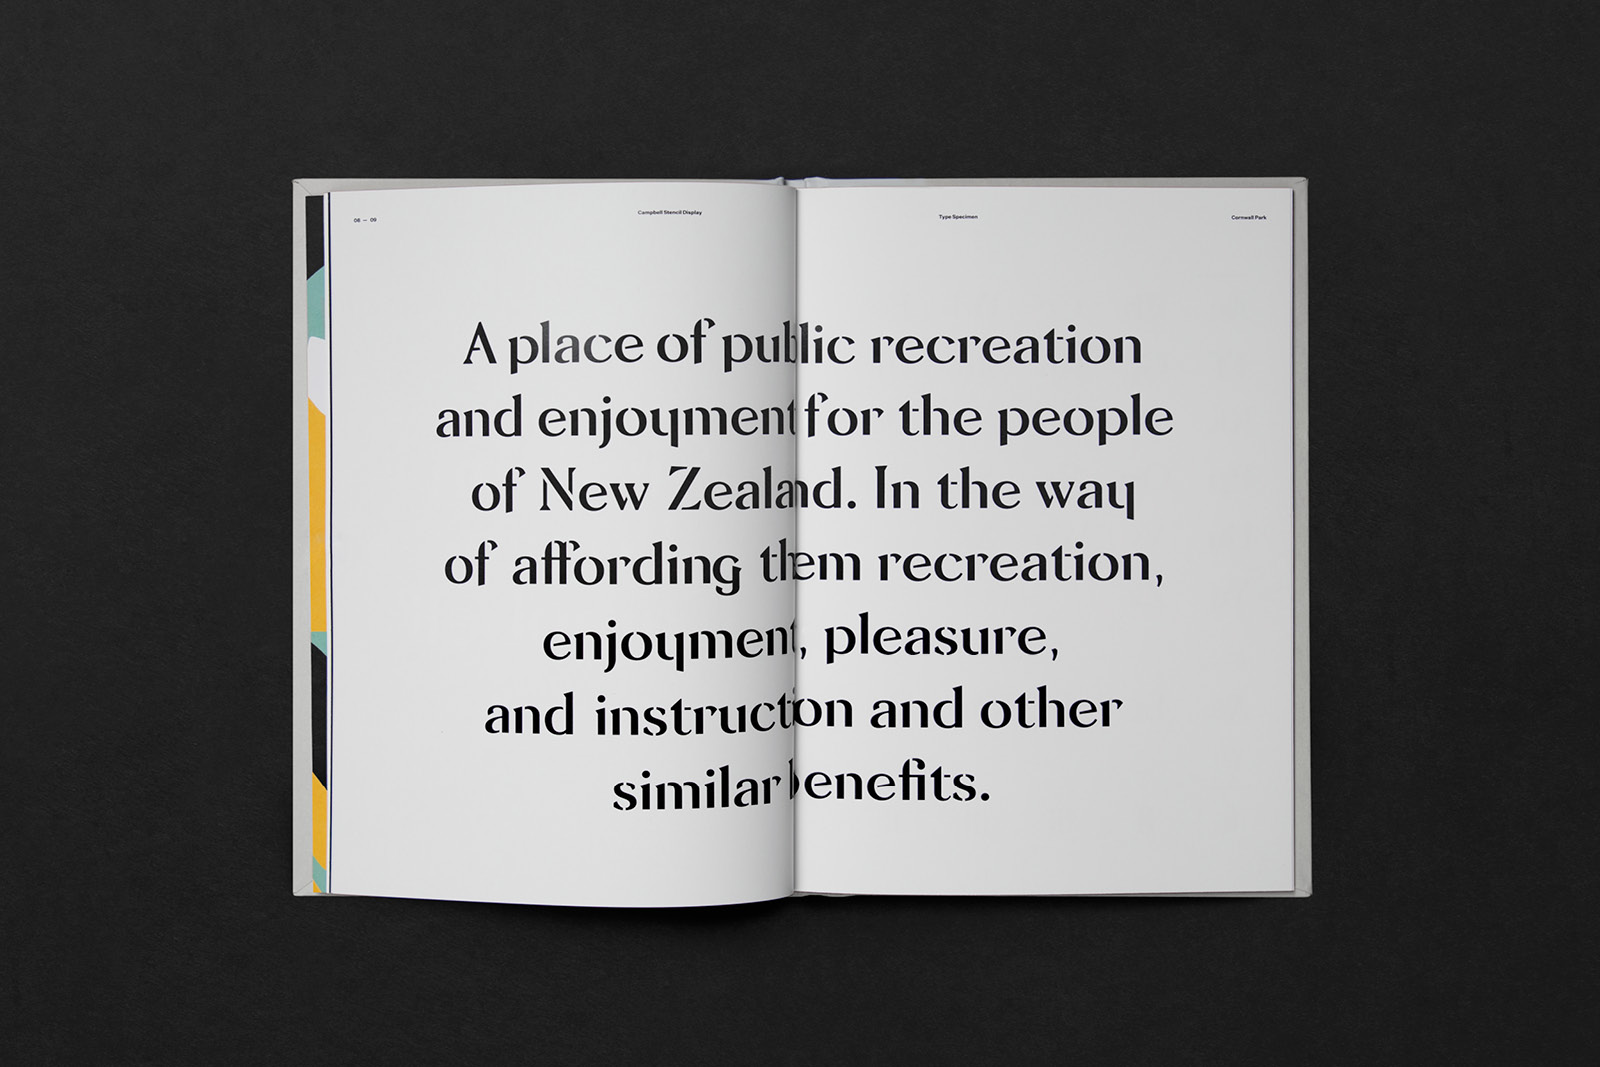 Open pages of book showcasing typeface